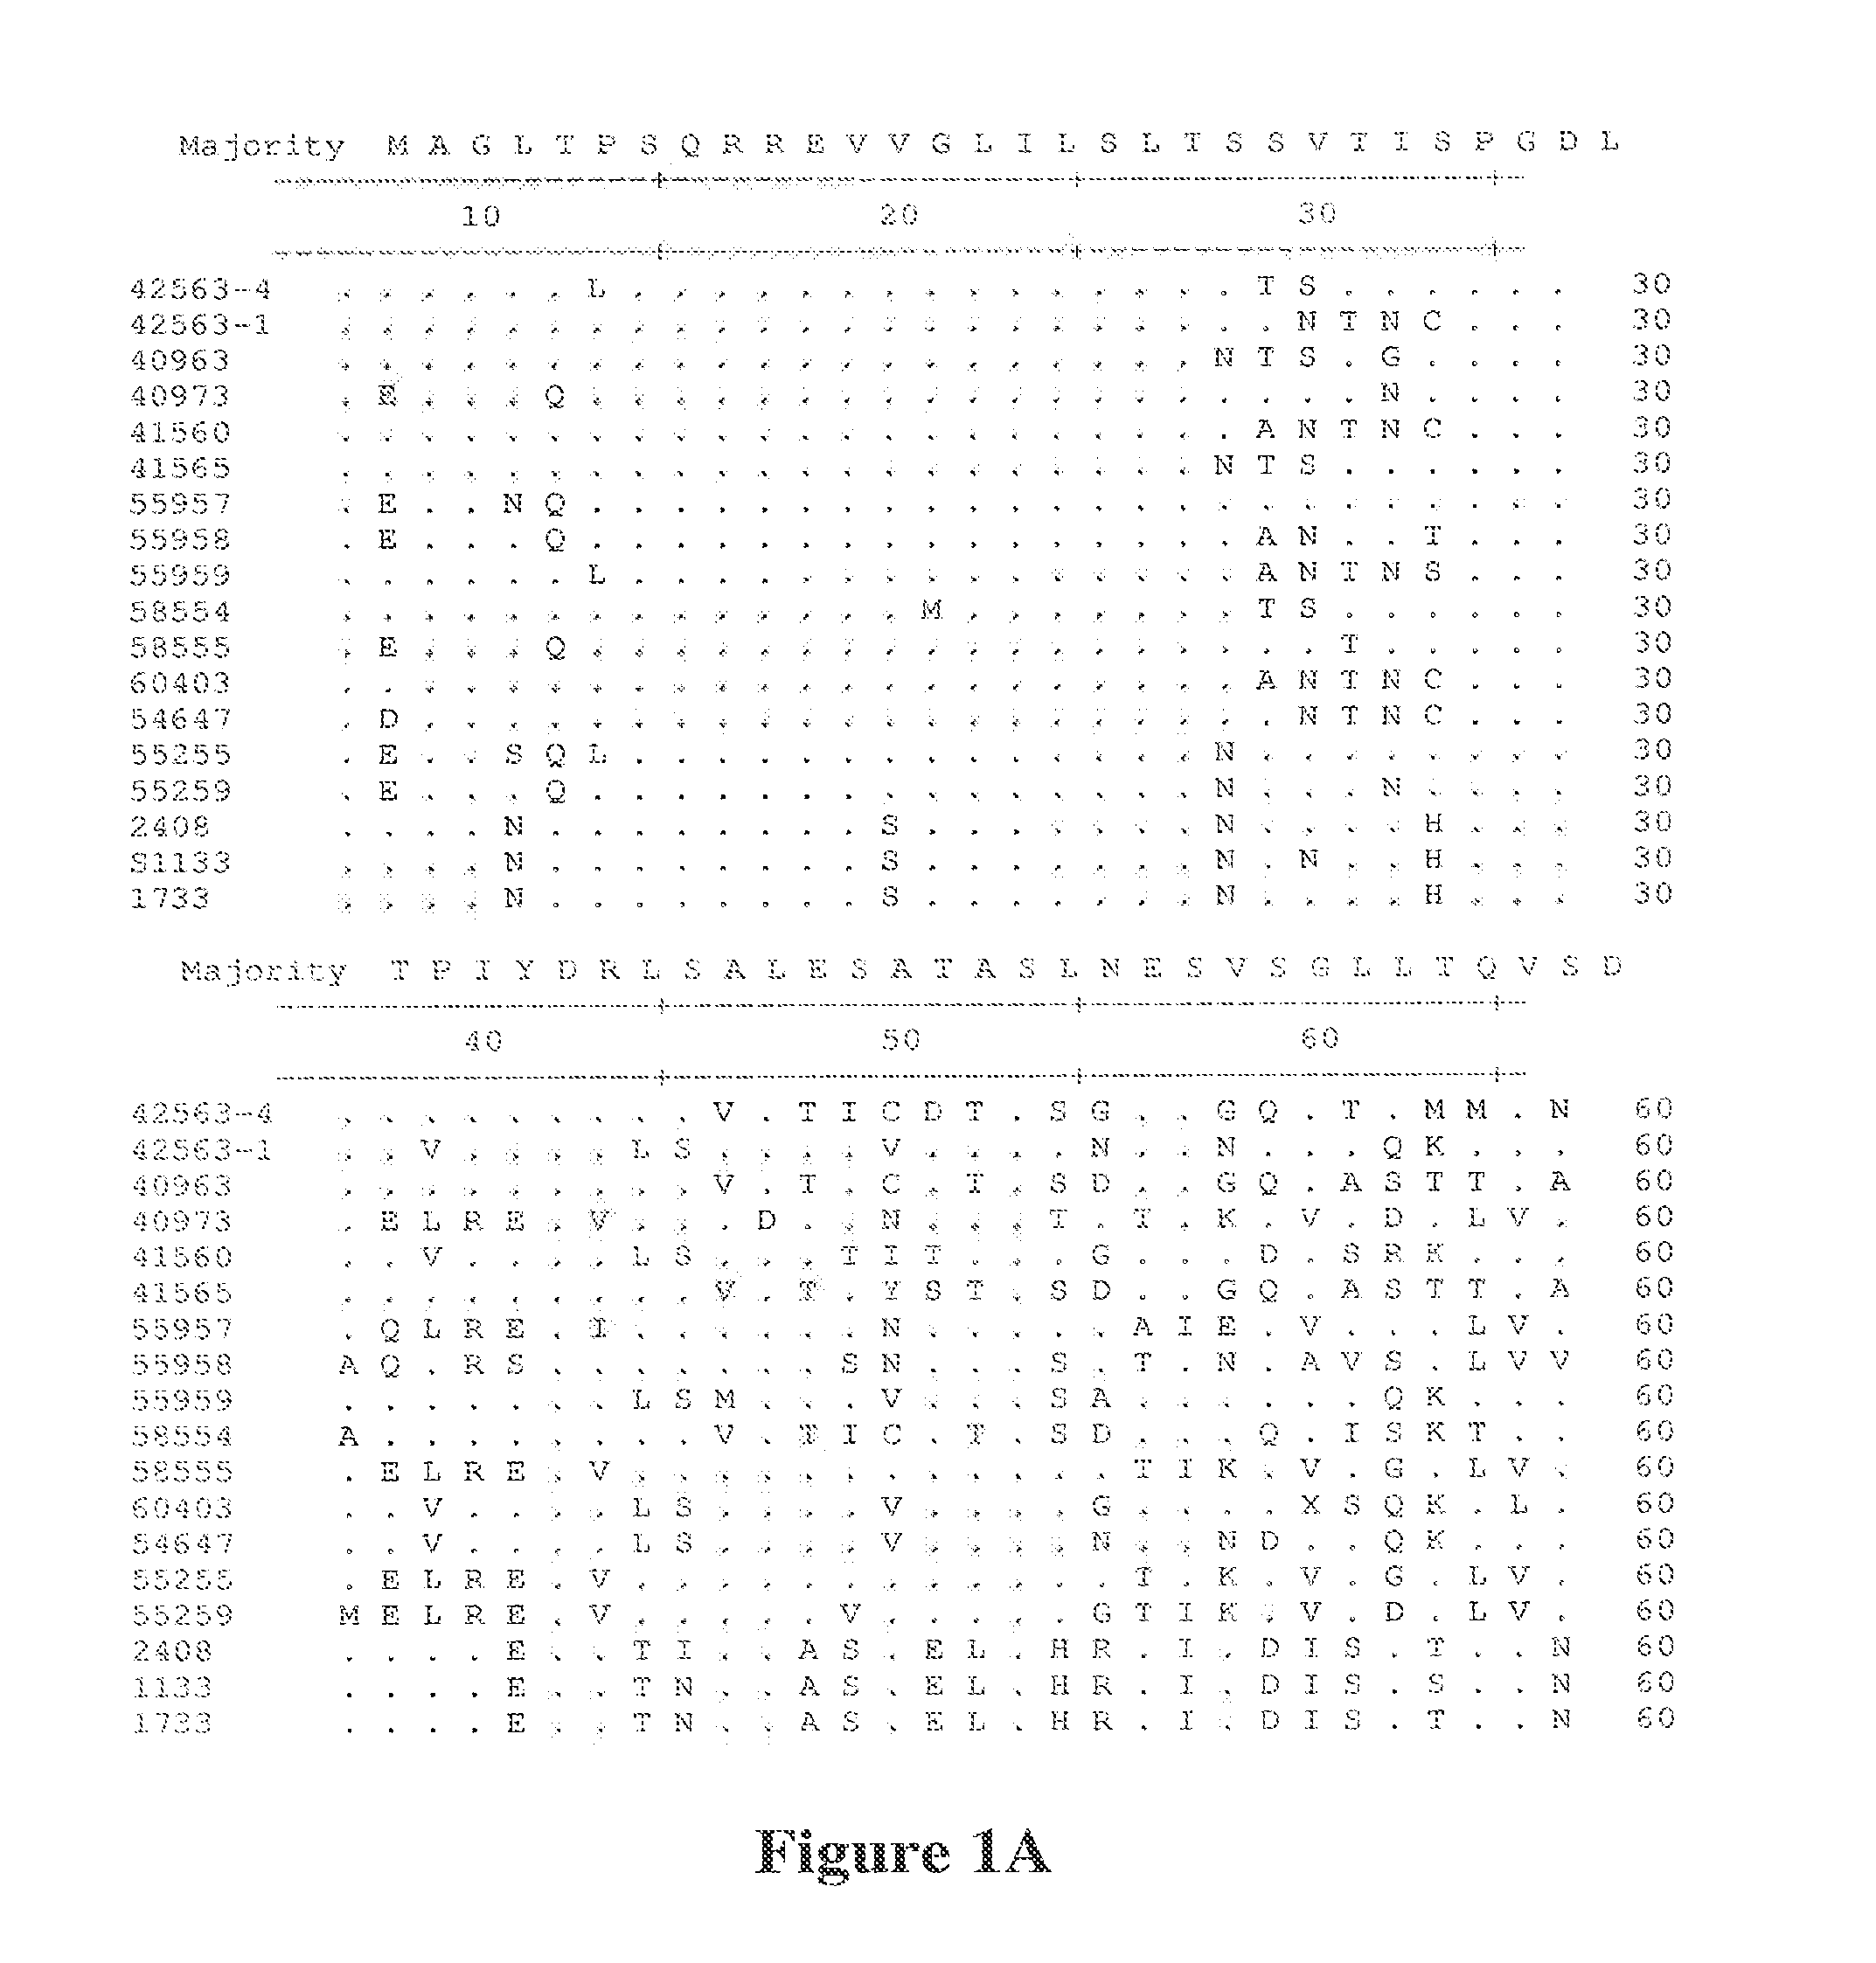 Reovirus compositions and methods of use